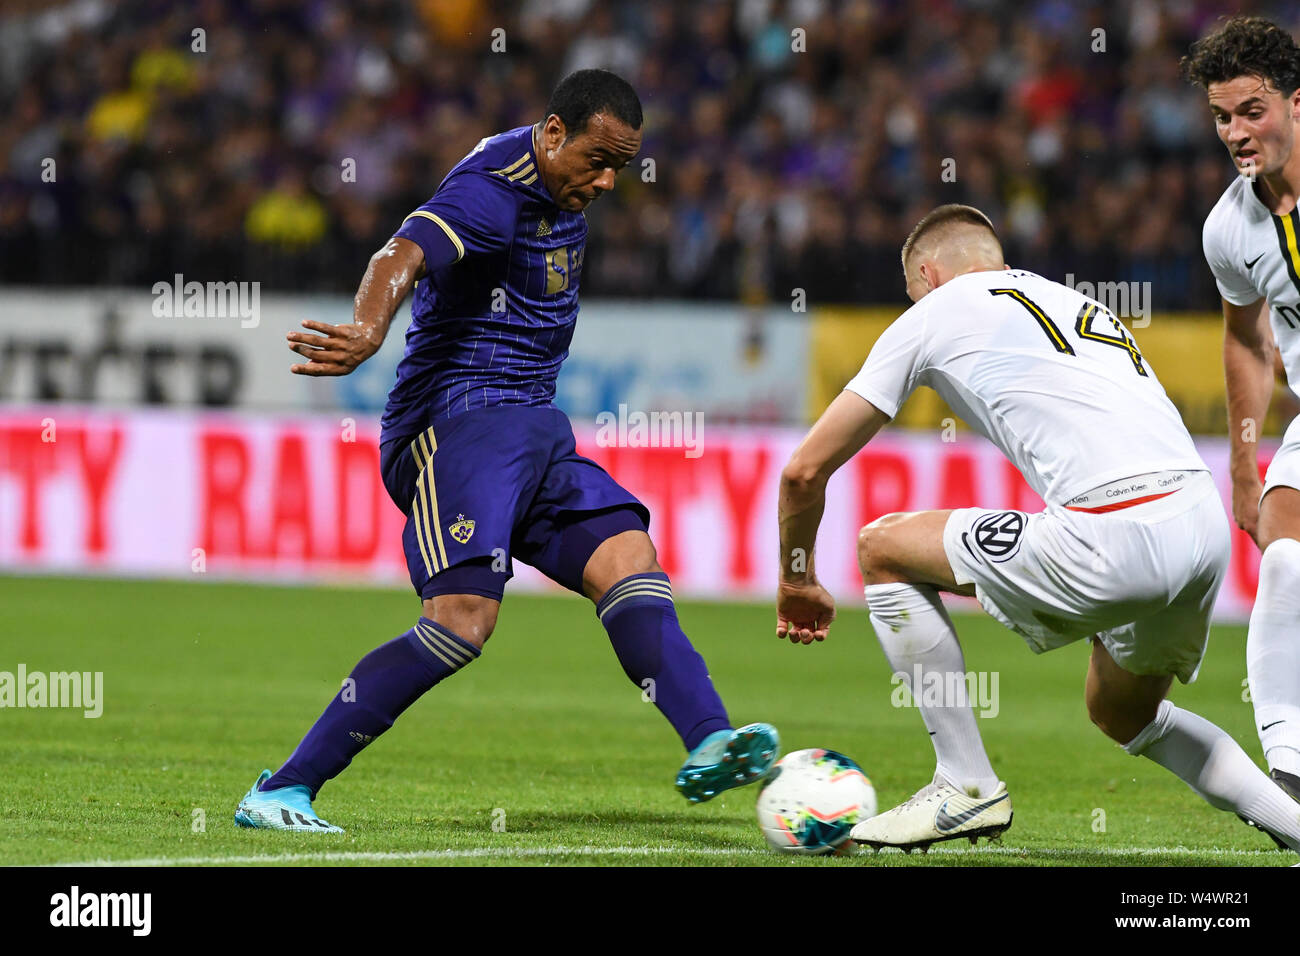 Maribor, Slovenia. 24th July, 2019. Marcos Tavares of Maribor and Karol  Mets of AIK in action during the Second qualifying round of the UEFA Champions  League between NK Maribor and AIK Football